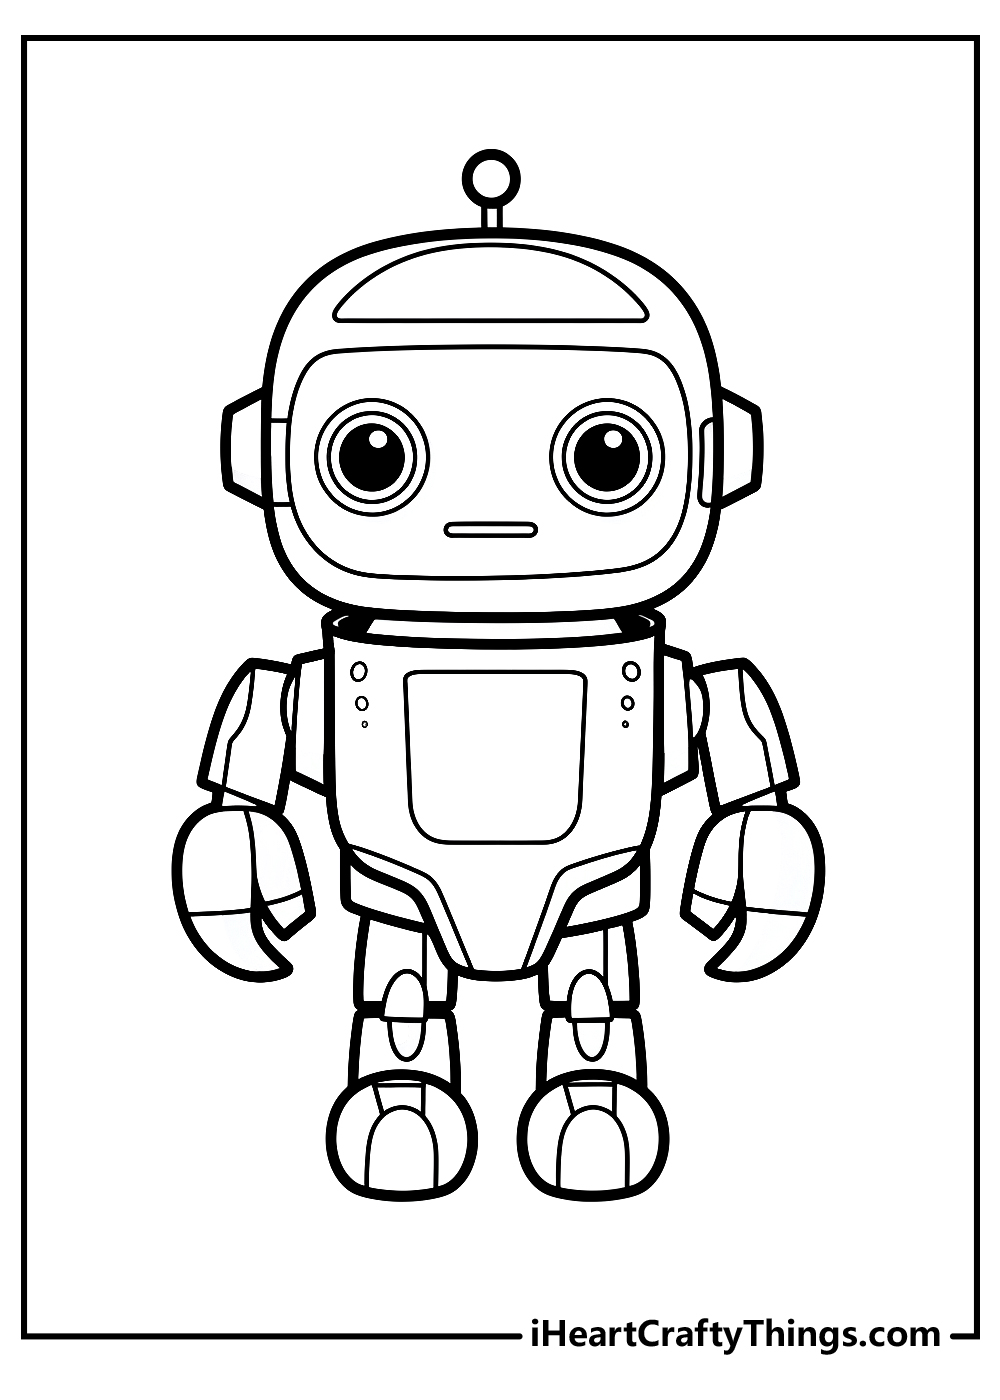 https://iheartcraftythings.com/wp-content/uploads/2022/04/Robot-Coloring-Pages1.jpg